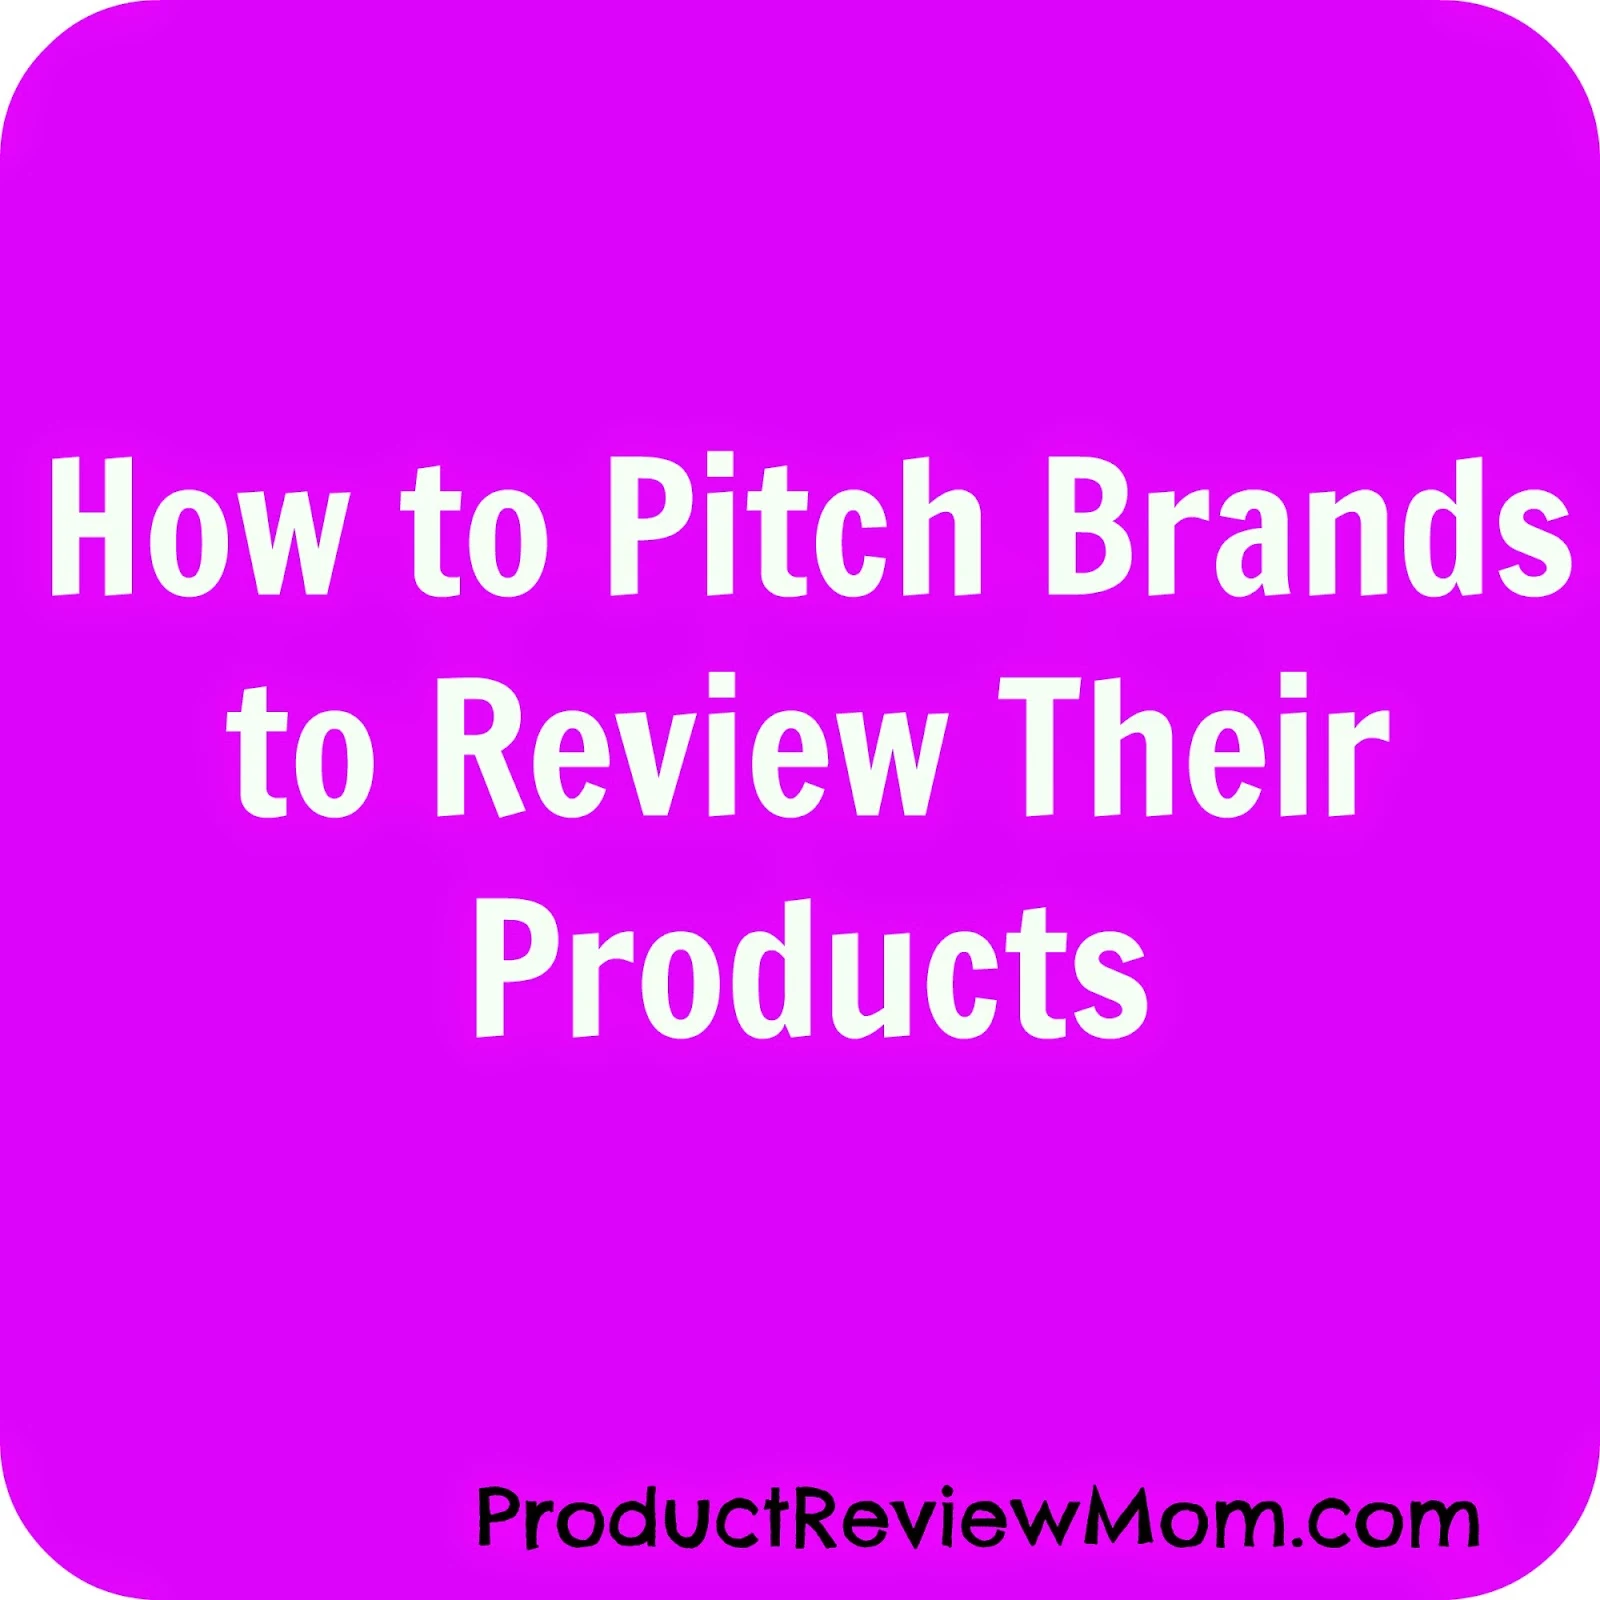 How to Pitch Brands to Review Their Products #BloggingTips via www.Productreviewmom.com